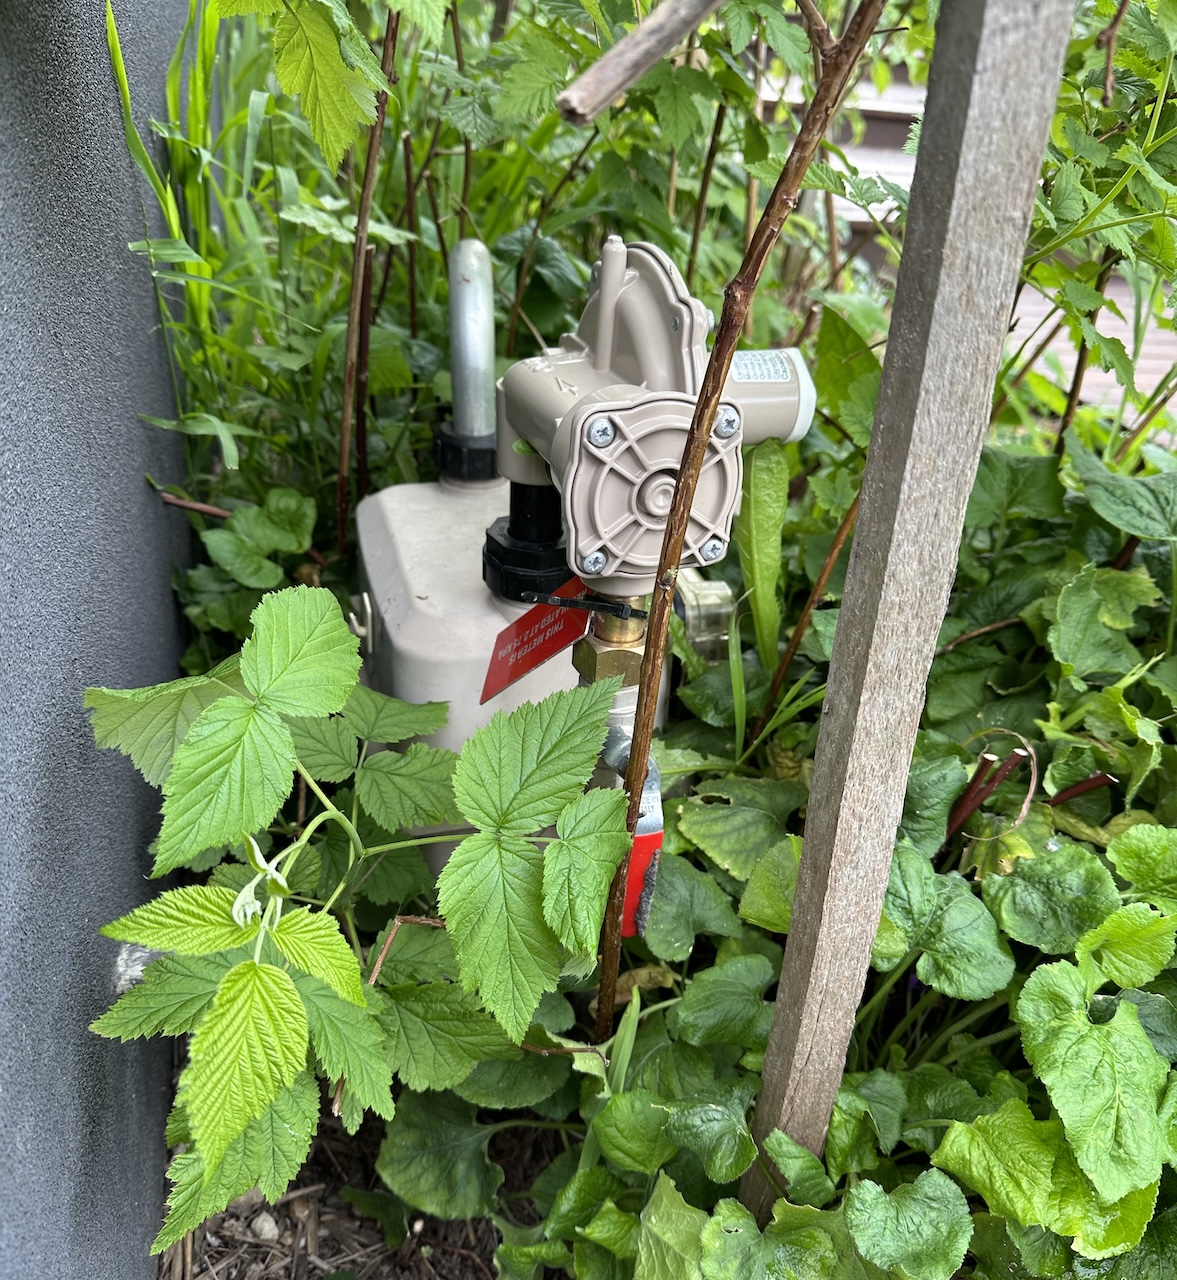 Our gas meter (surrounded by raspberry canes) prior to being removed.